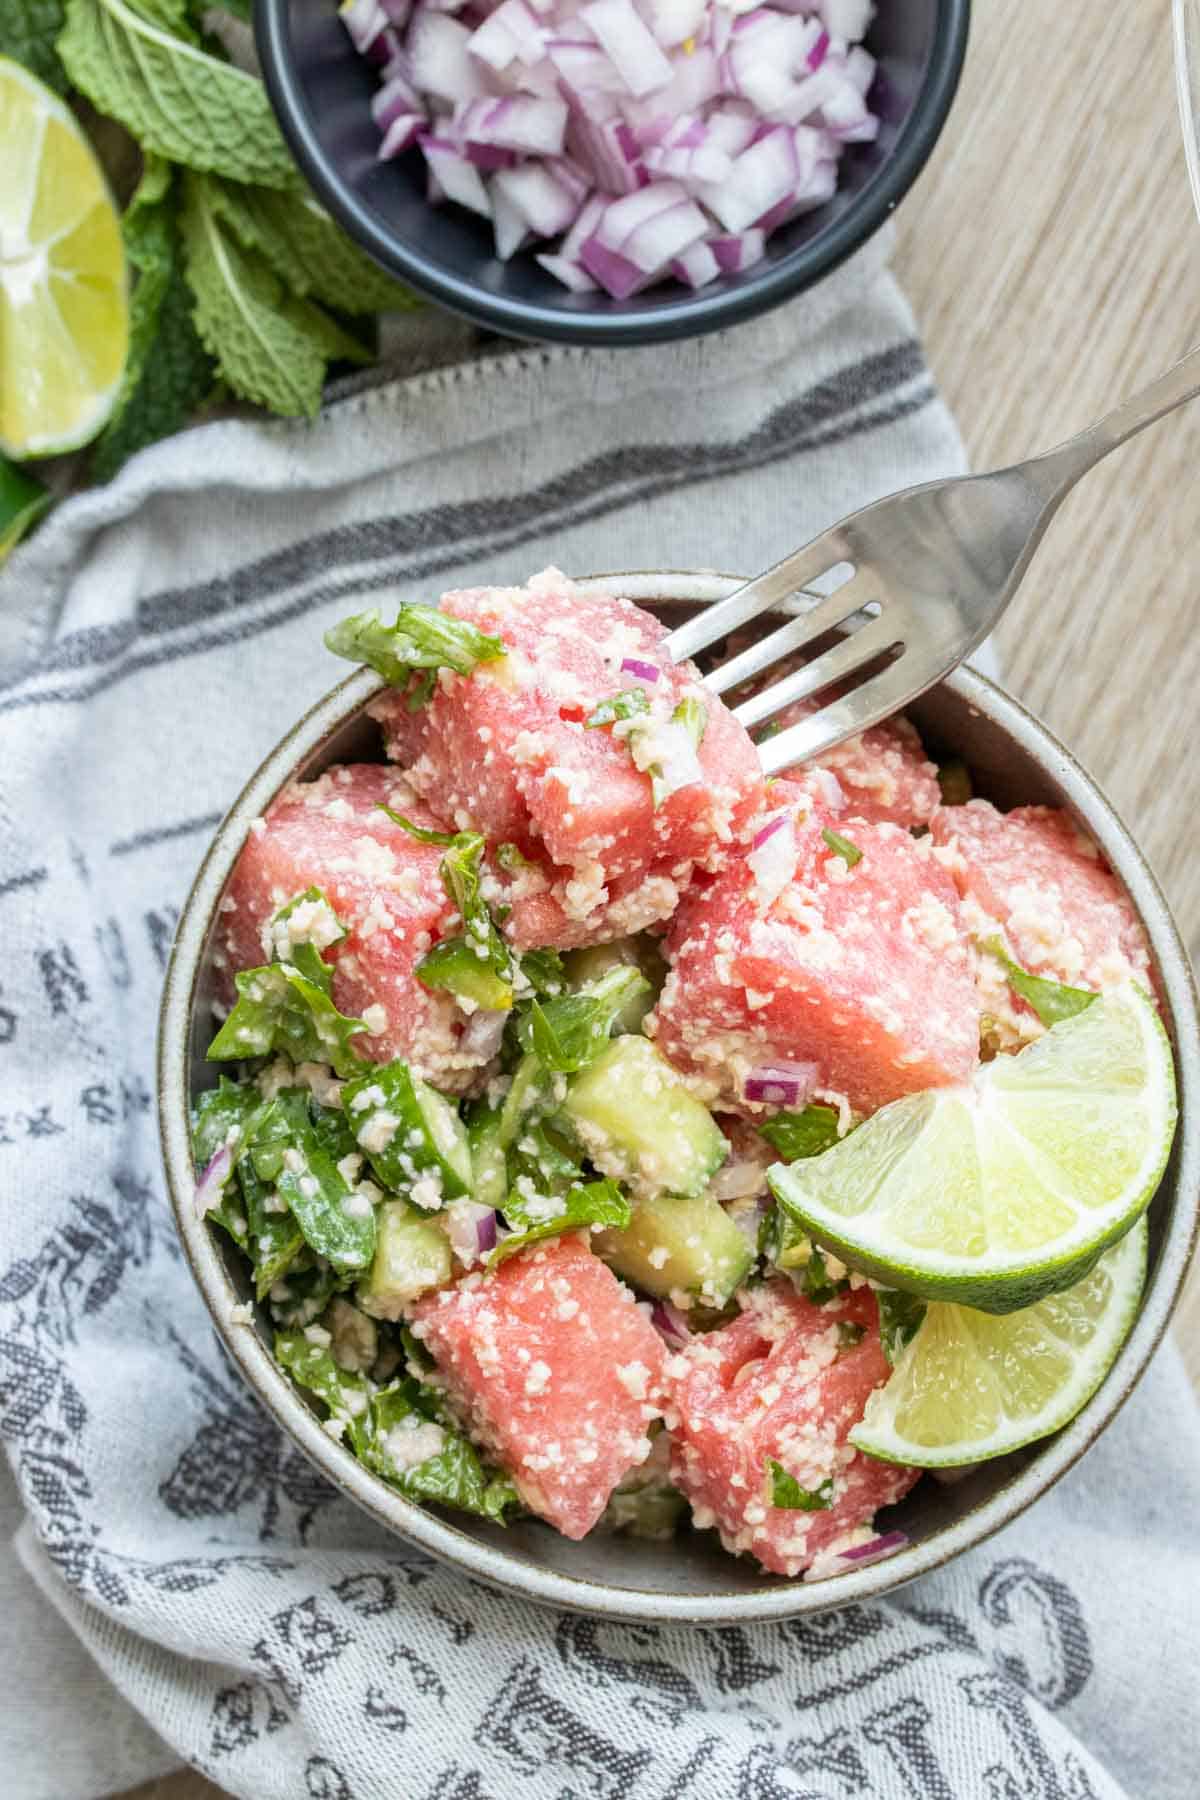 A fork getting a bite of watermelon feta mint salad from a grey bowl.